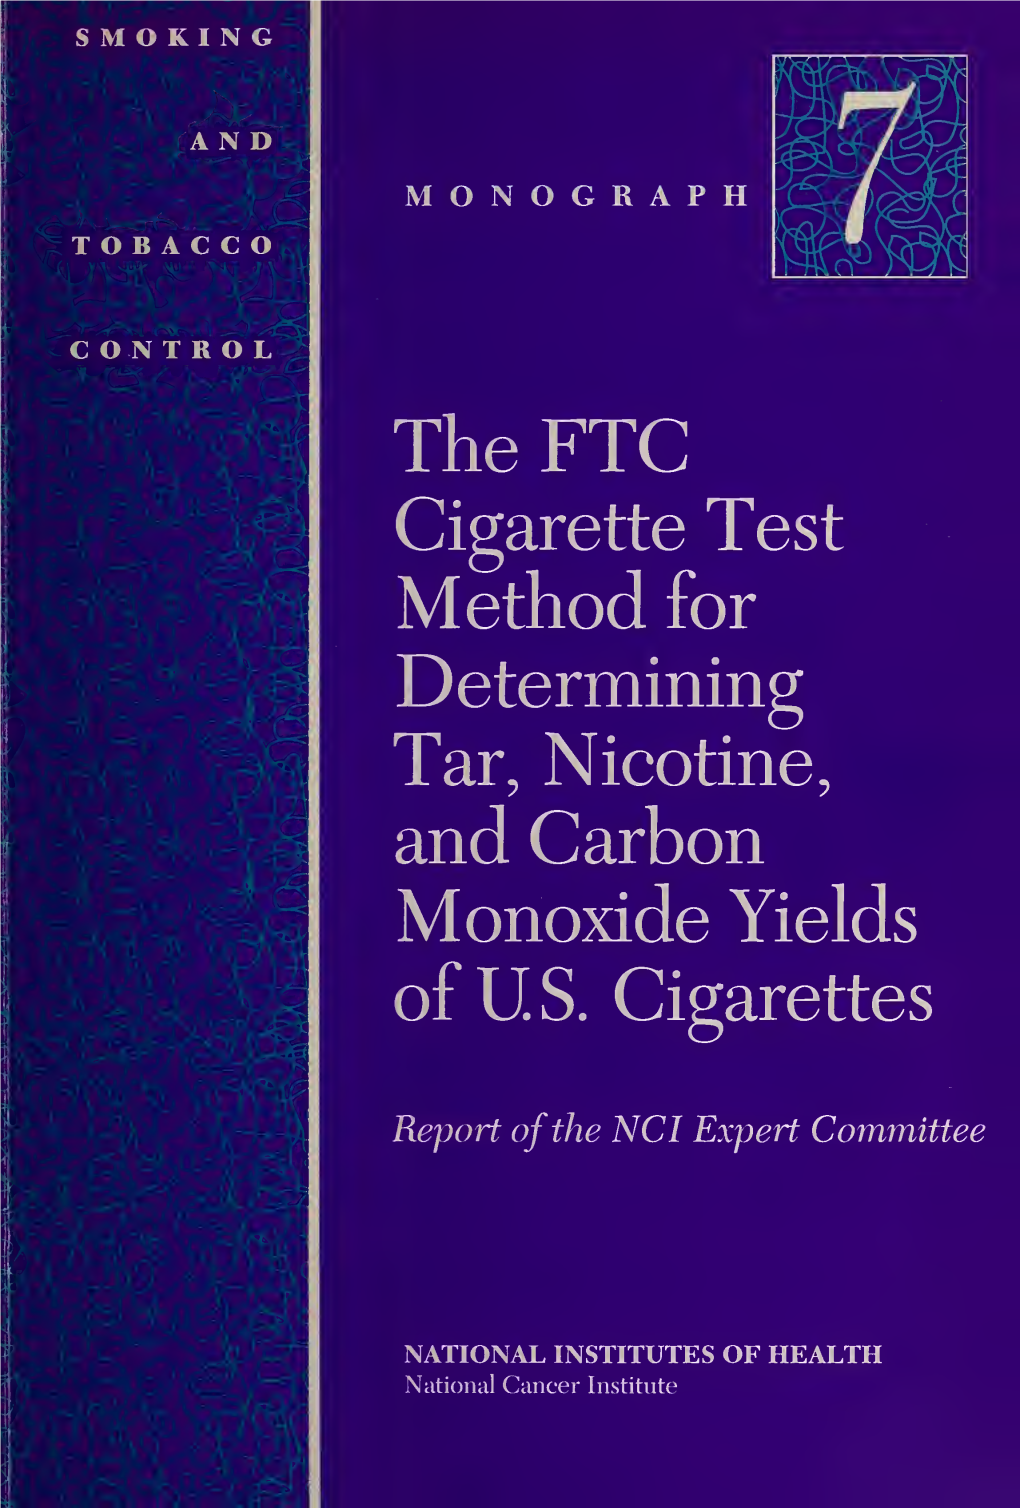 The FTC Cigarette Test Method for Determining Tar, Nicotine, and Carbon Monoxide Yields Ofu.S